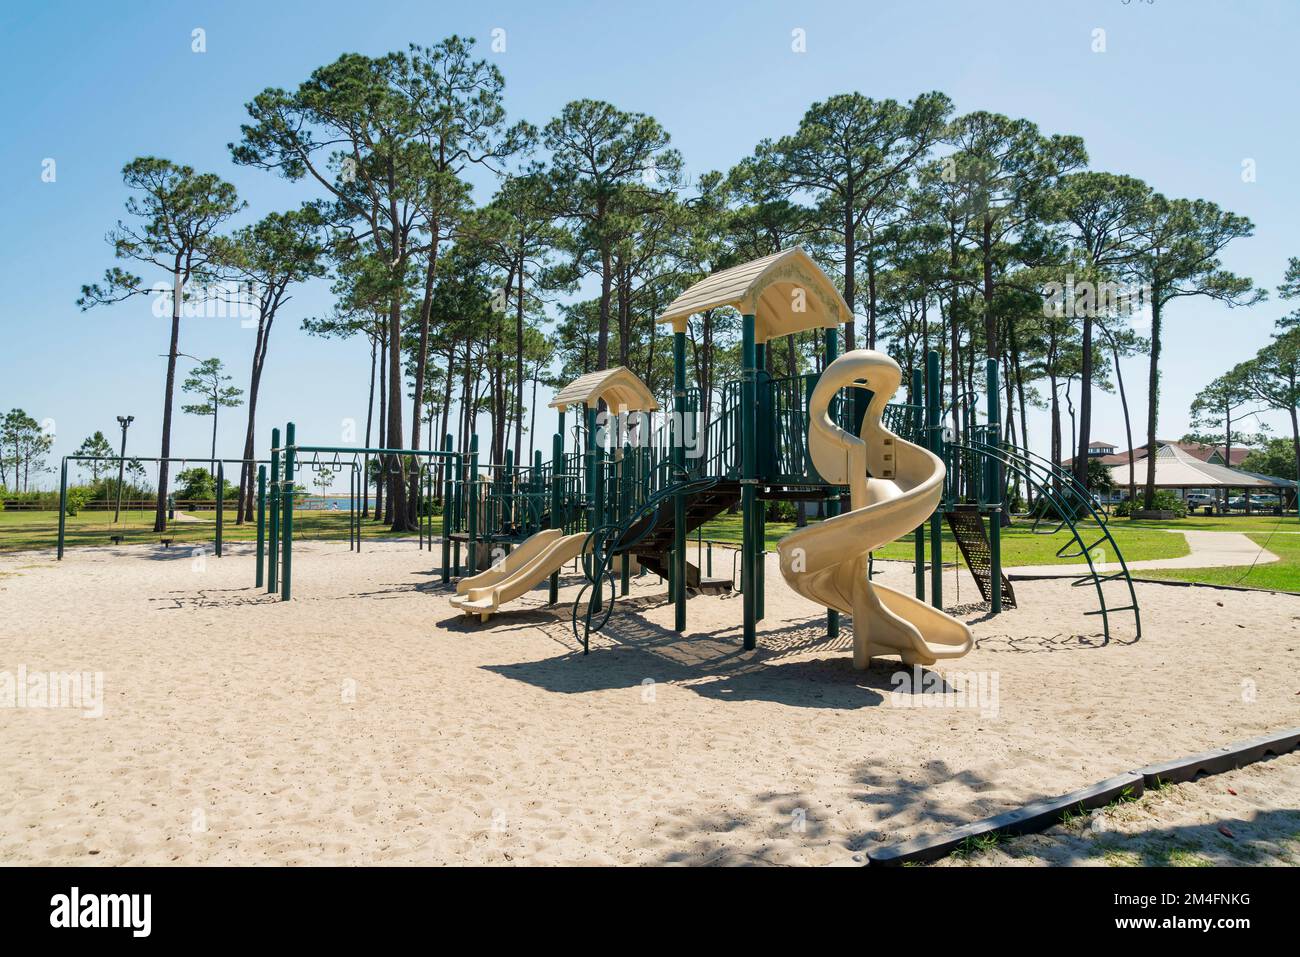 https://c8.alamy.com/comp/2M4FNKG/destin-florida-playground-on-a-sand-with-slides-monkey-bars-and-swings-playground-near-the-tall-trees-and-grass-land-field-at-the-background-2M4FNKG.jpg